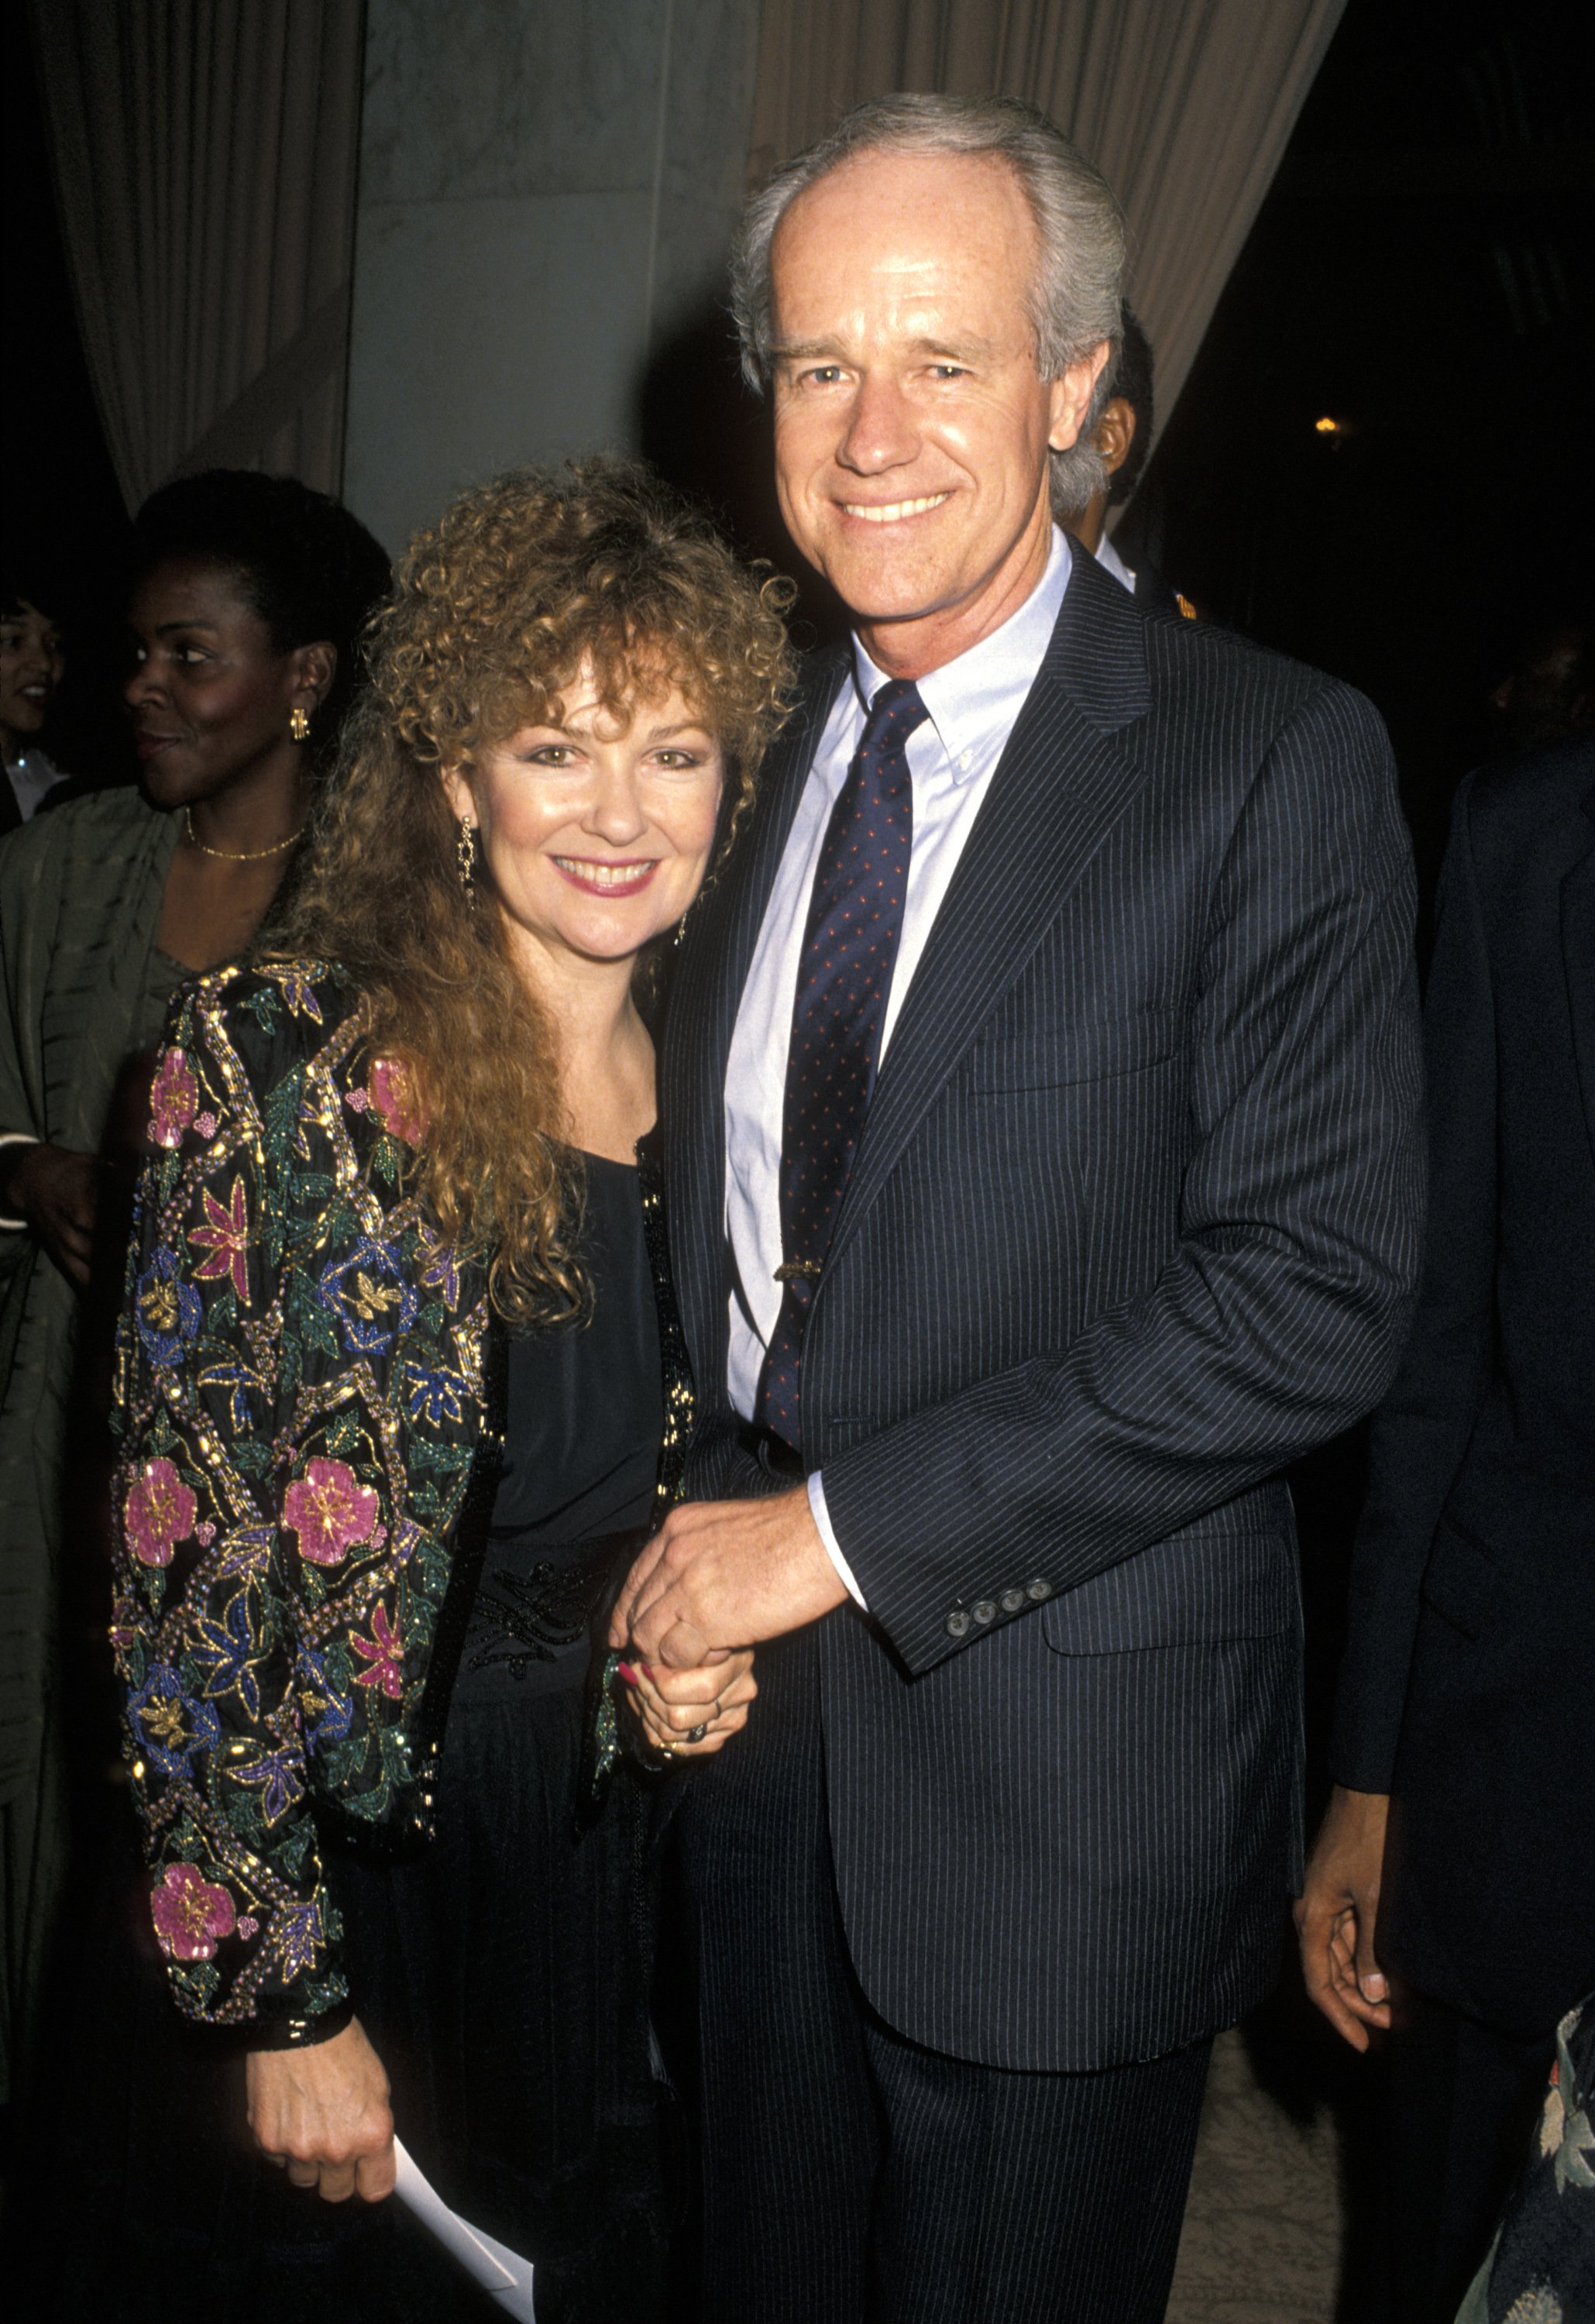 Shelley Fabares and Mike Farrell attend the First Annual Nelson Mandela "Bridge to Freedom" Awards at the Beverly Wilshire Hotel on April 1, 1990 in Beverly Hills, California. / Source: Getty Images